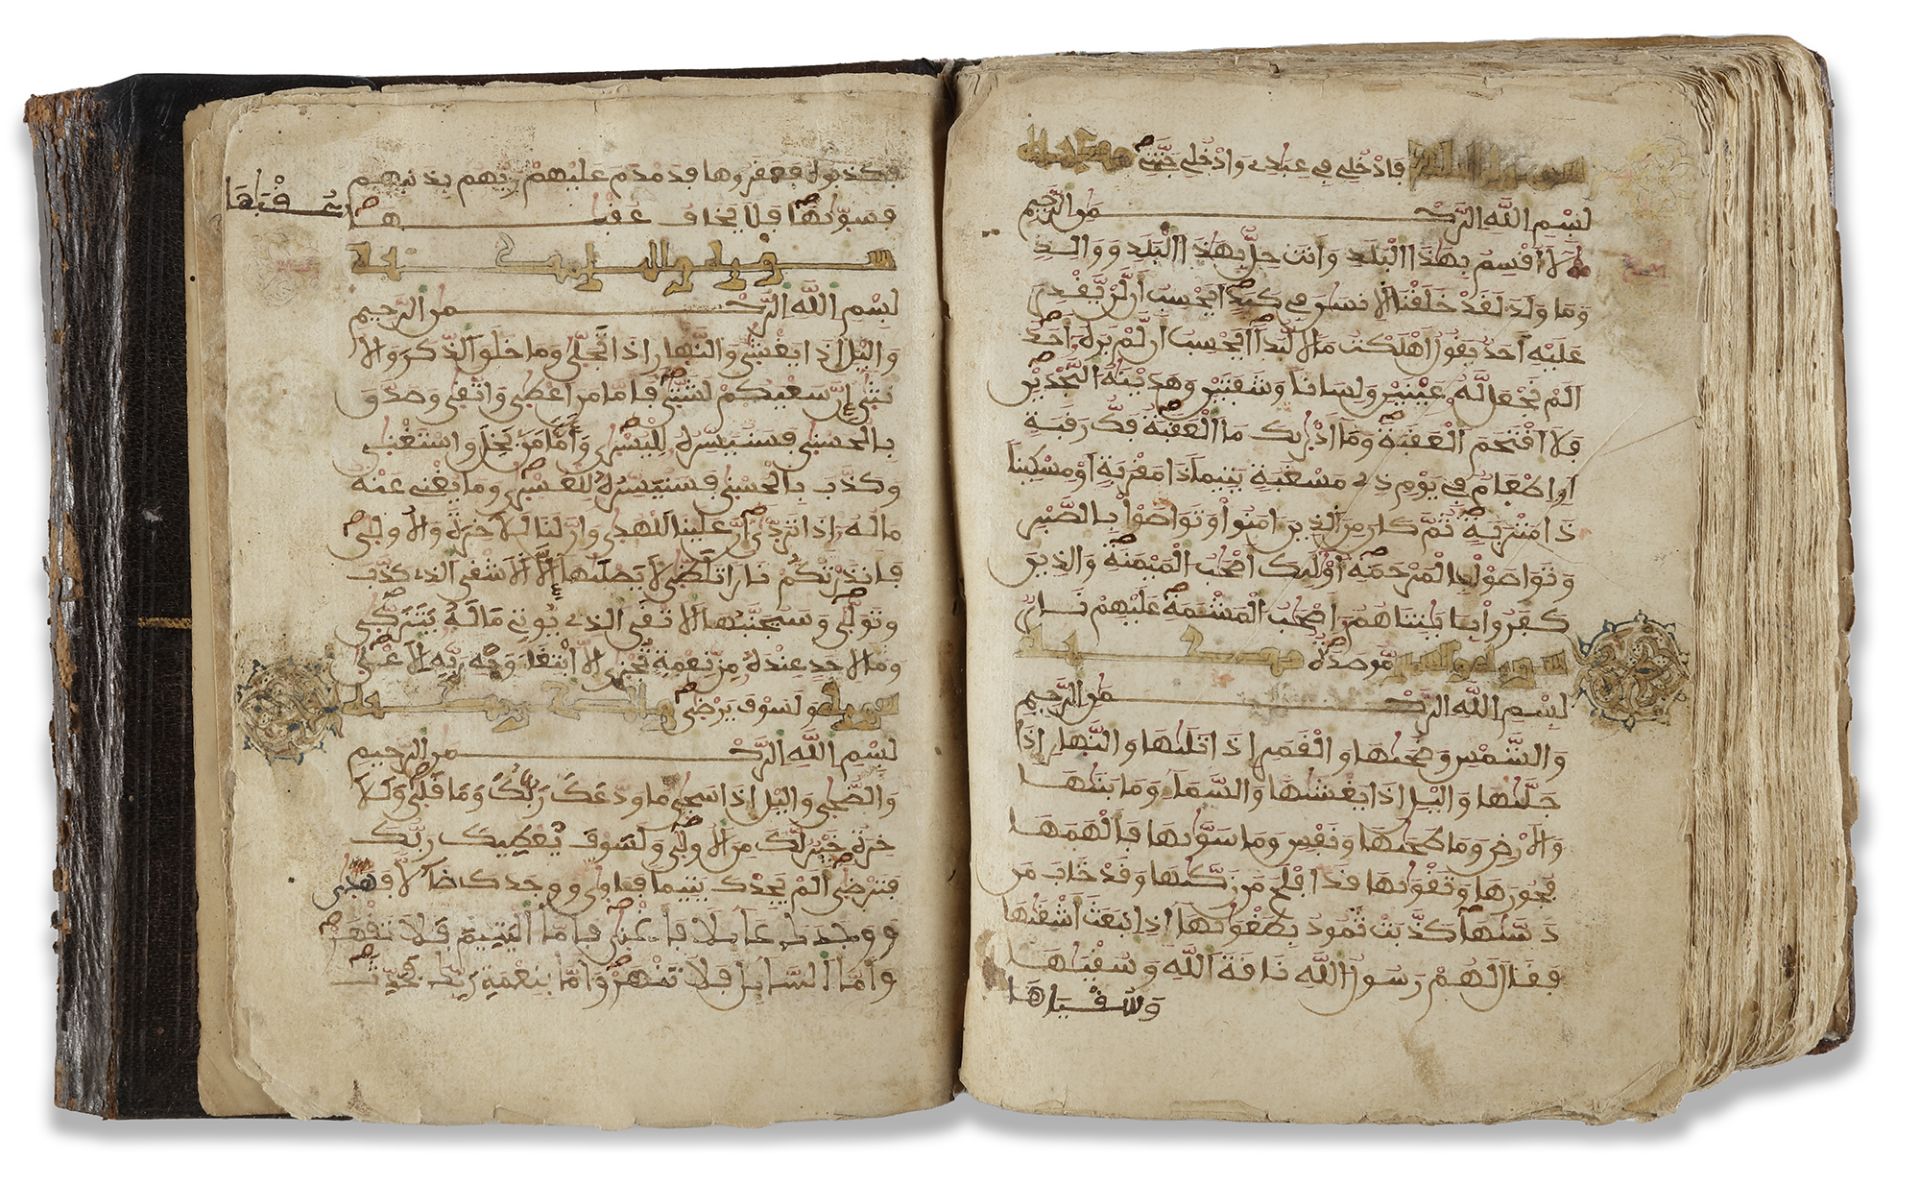 A QURAN IN MAGHRIBI SCRIPT, NORTH AFRICA, DATED 1010 AH/1601 AD - Image 6 of 7